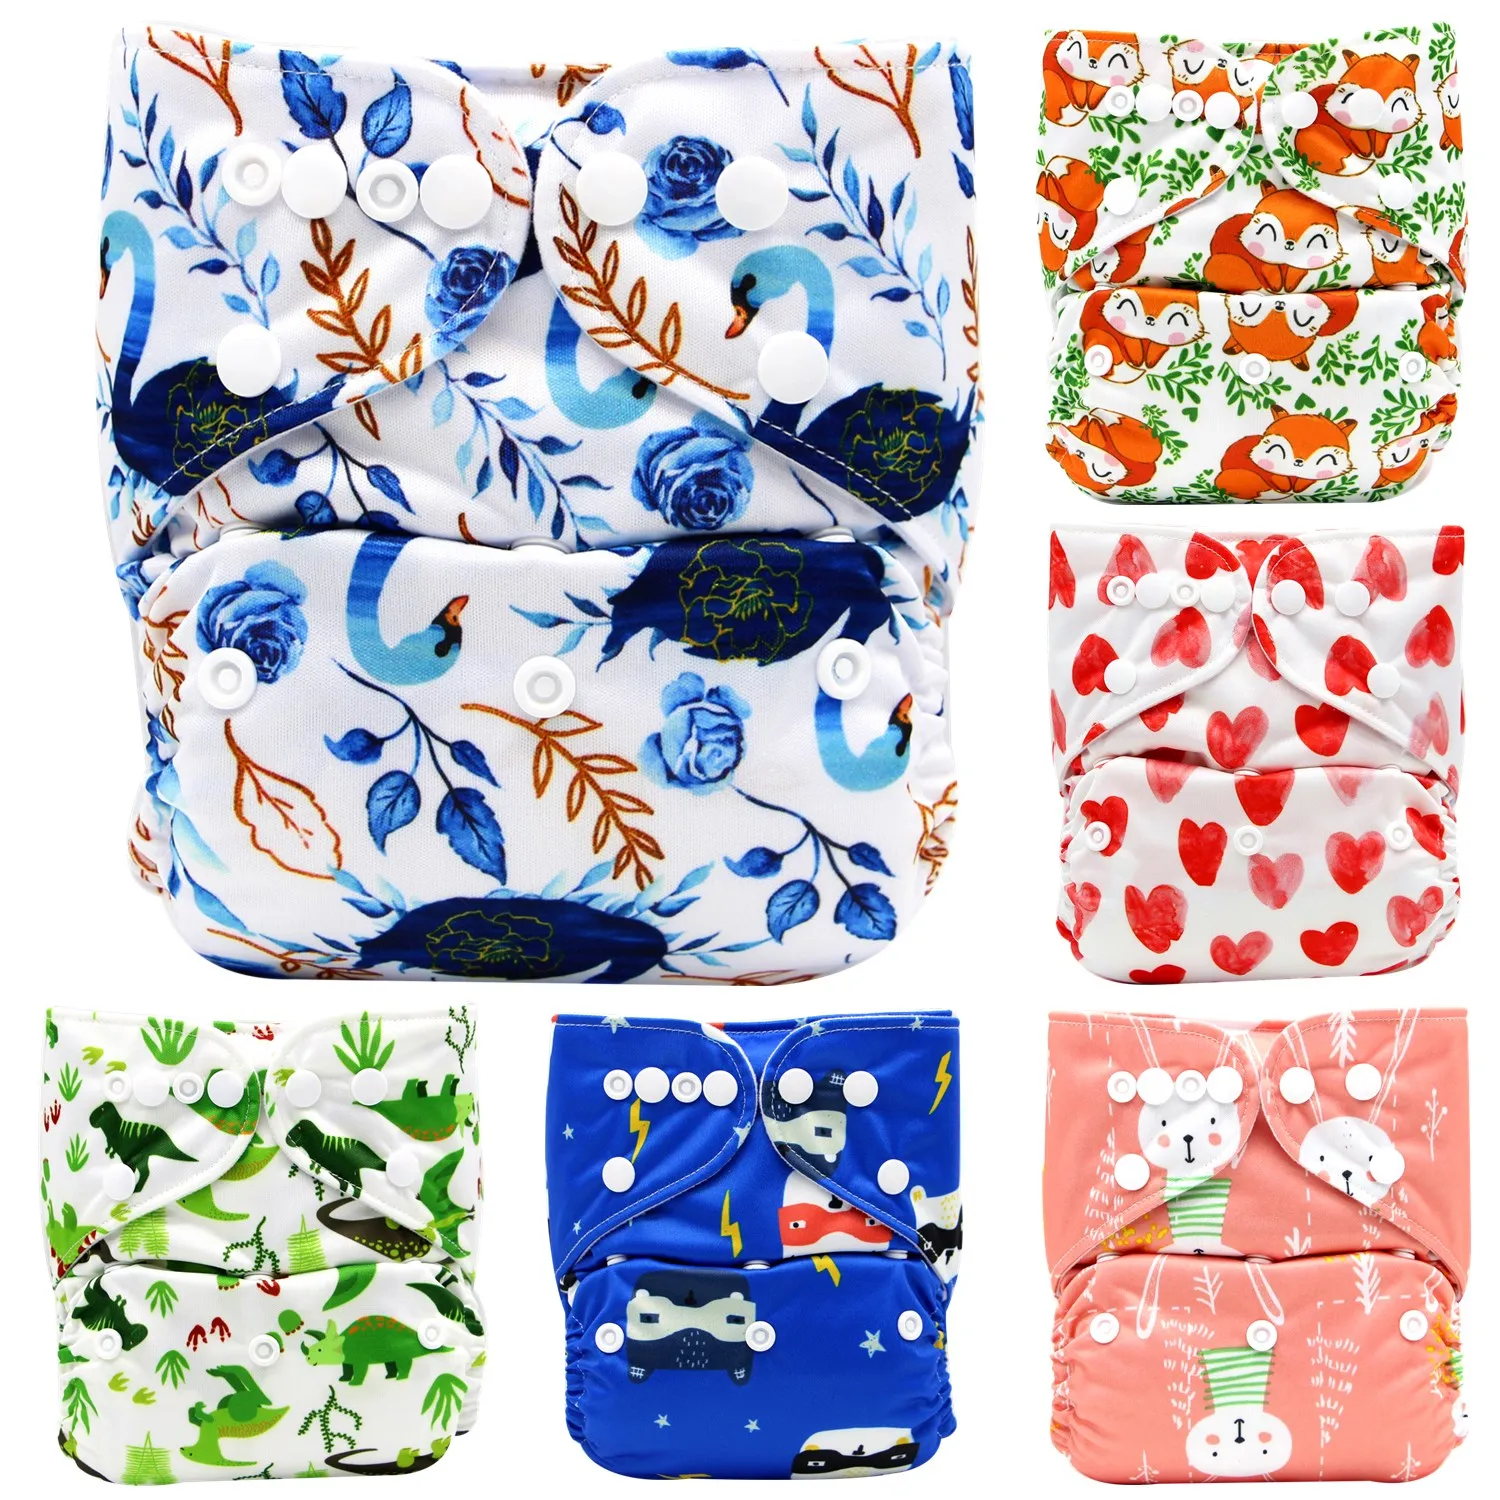 

Asenappy Baby Pocket Cloth Diaper Nappy Reusable Adjustable Washable Microfleece Inner 3kg-15kg 8lbs-36lbs